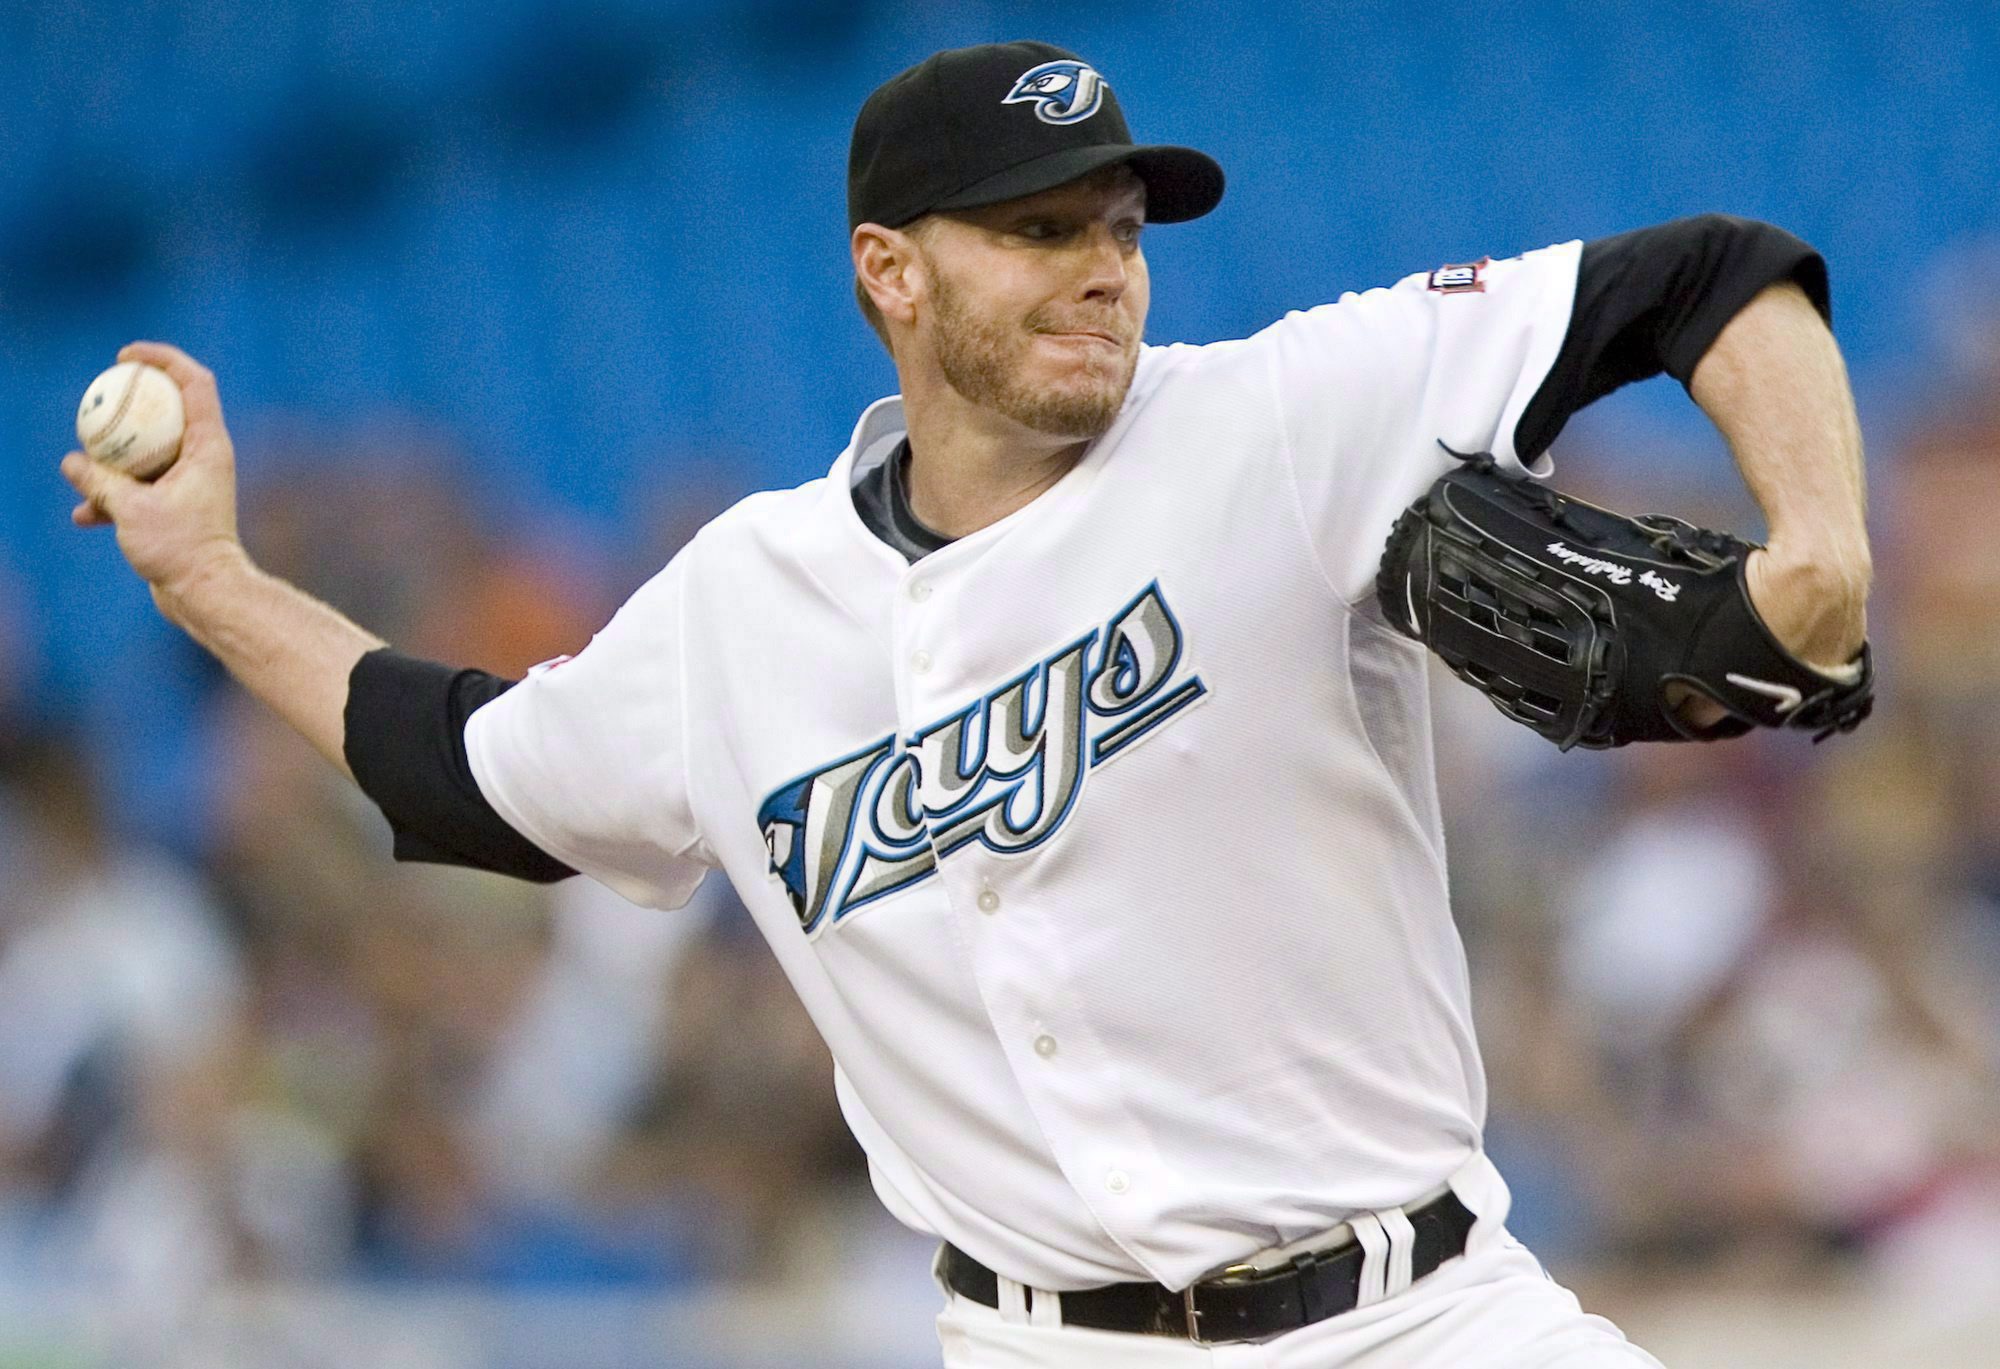 Drugs and Stunts Cited in Plane Crash That Killed Roy Halladay - The New  York Times